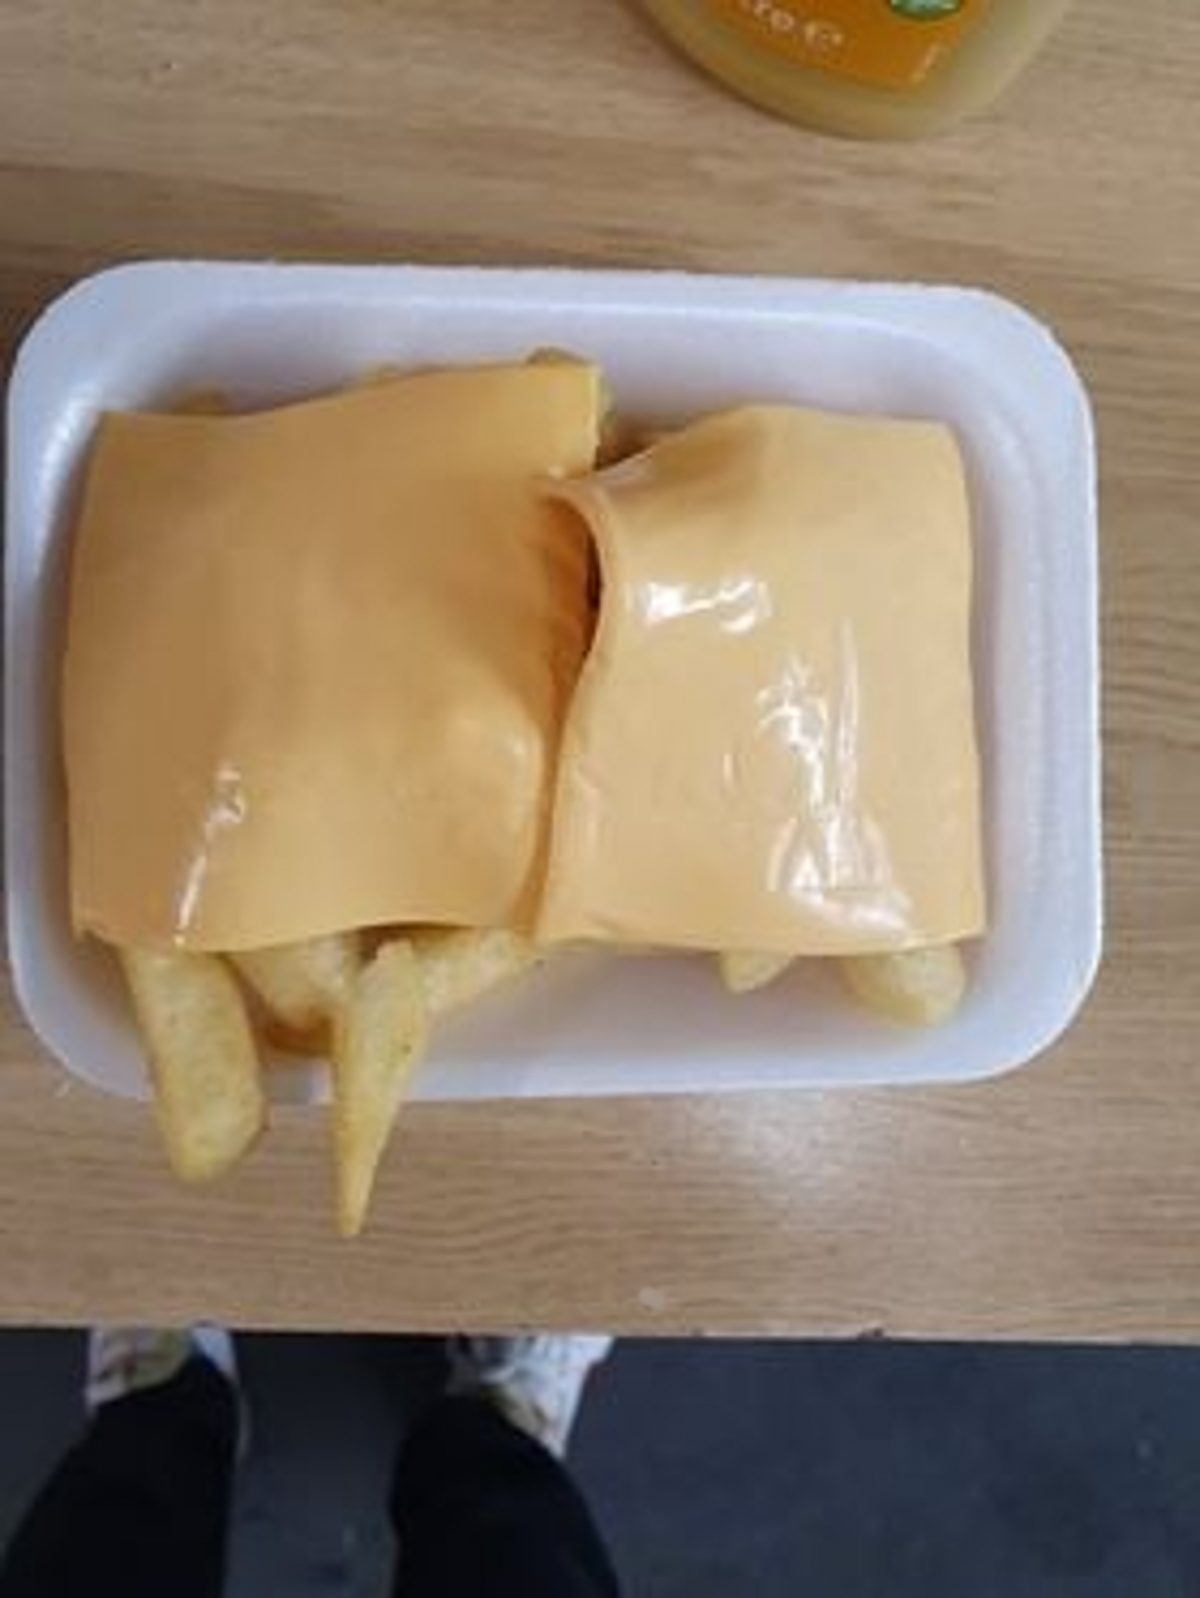 The unimpressive attempt at cheesy chips.